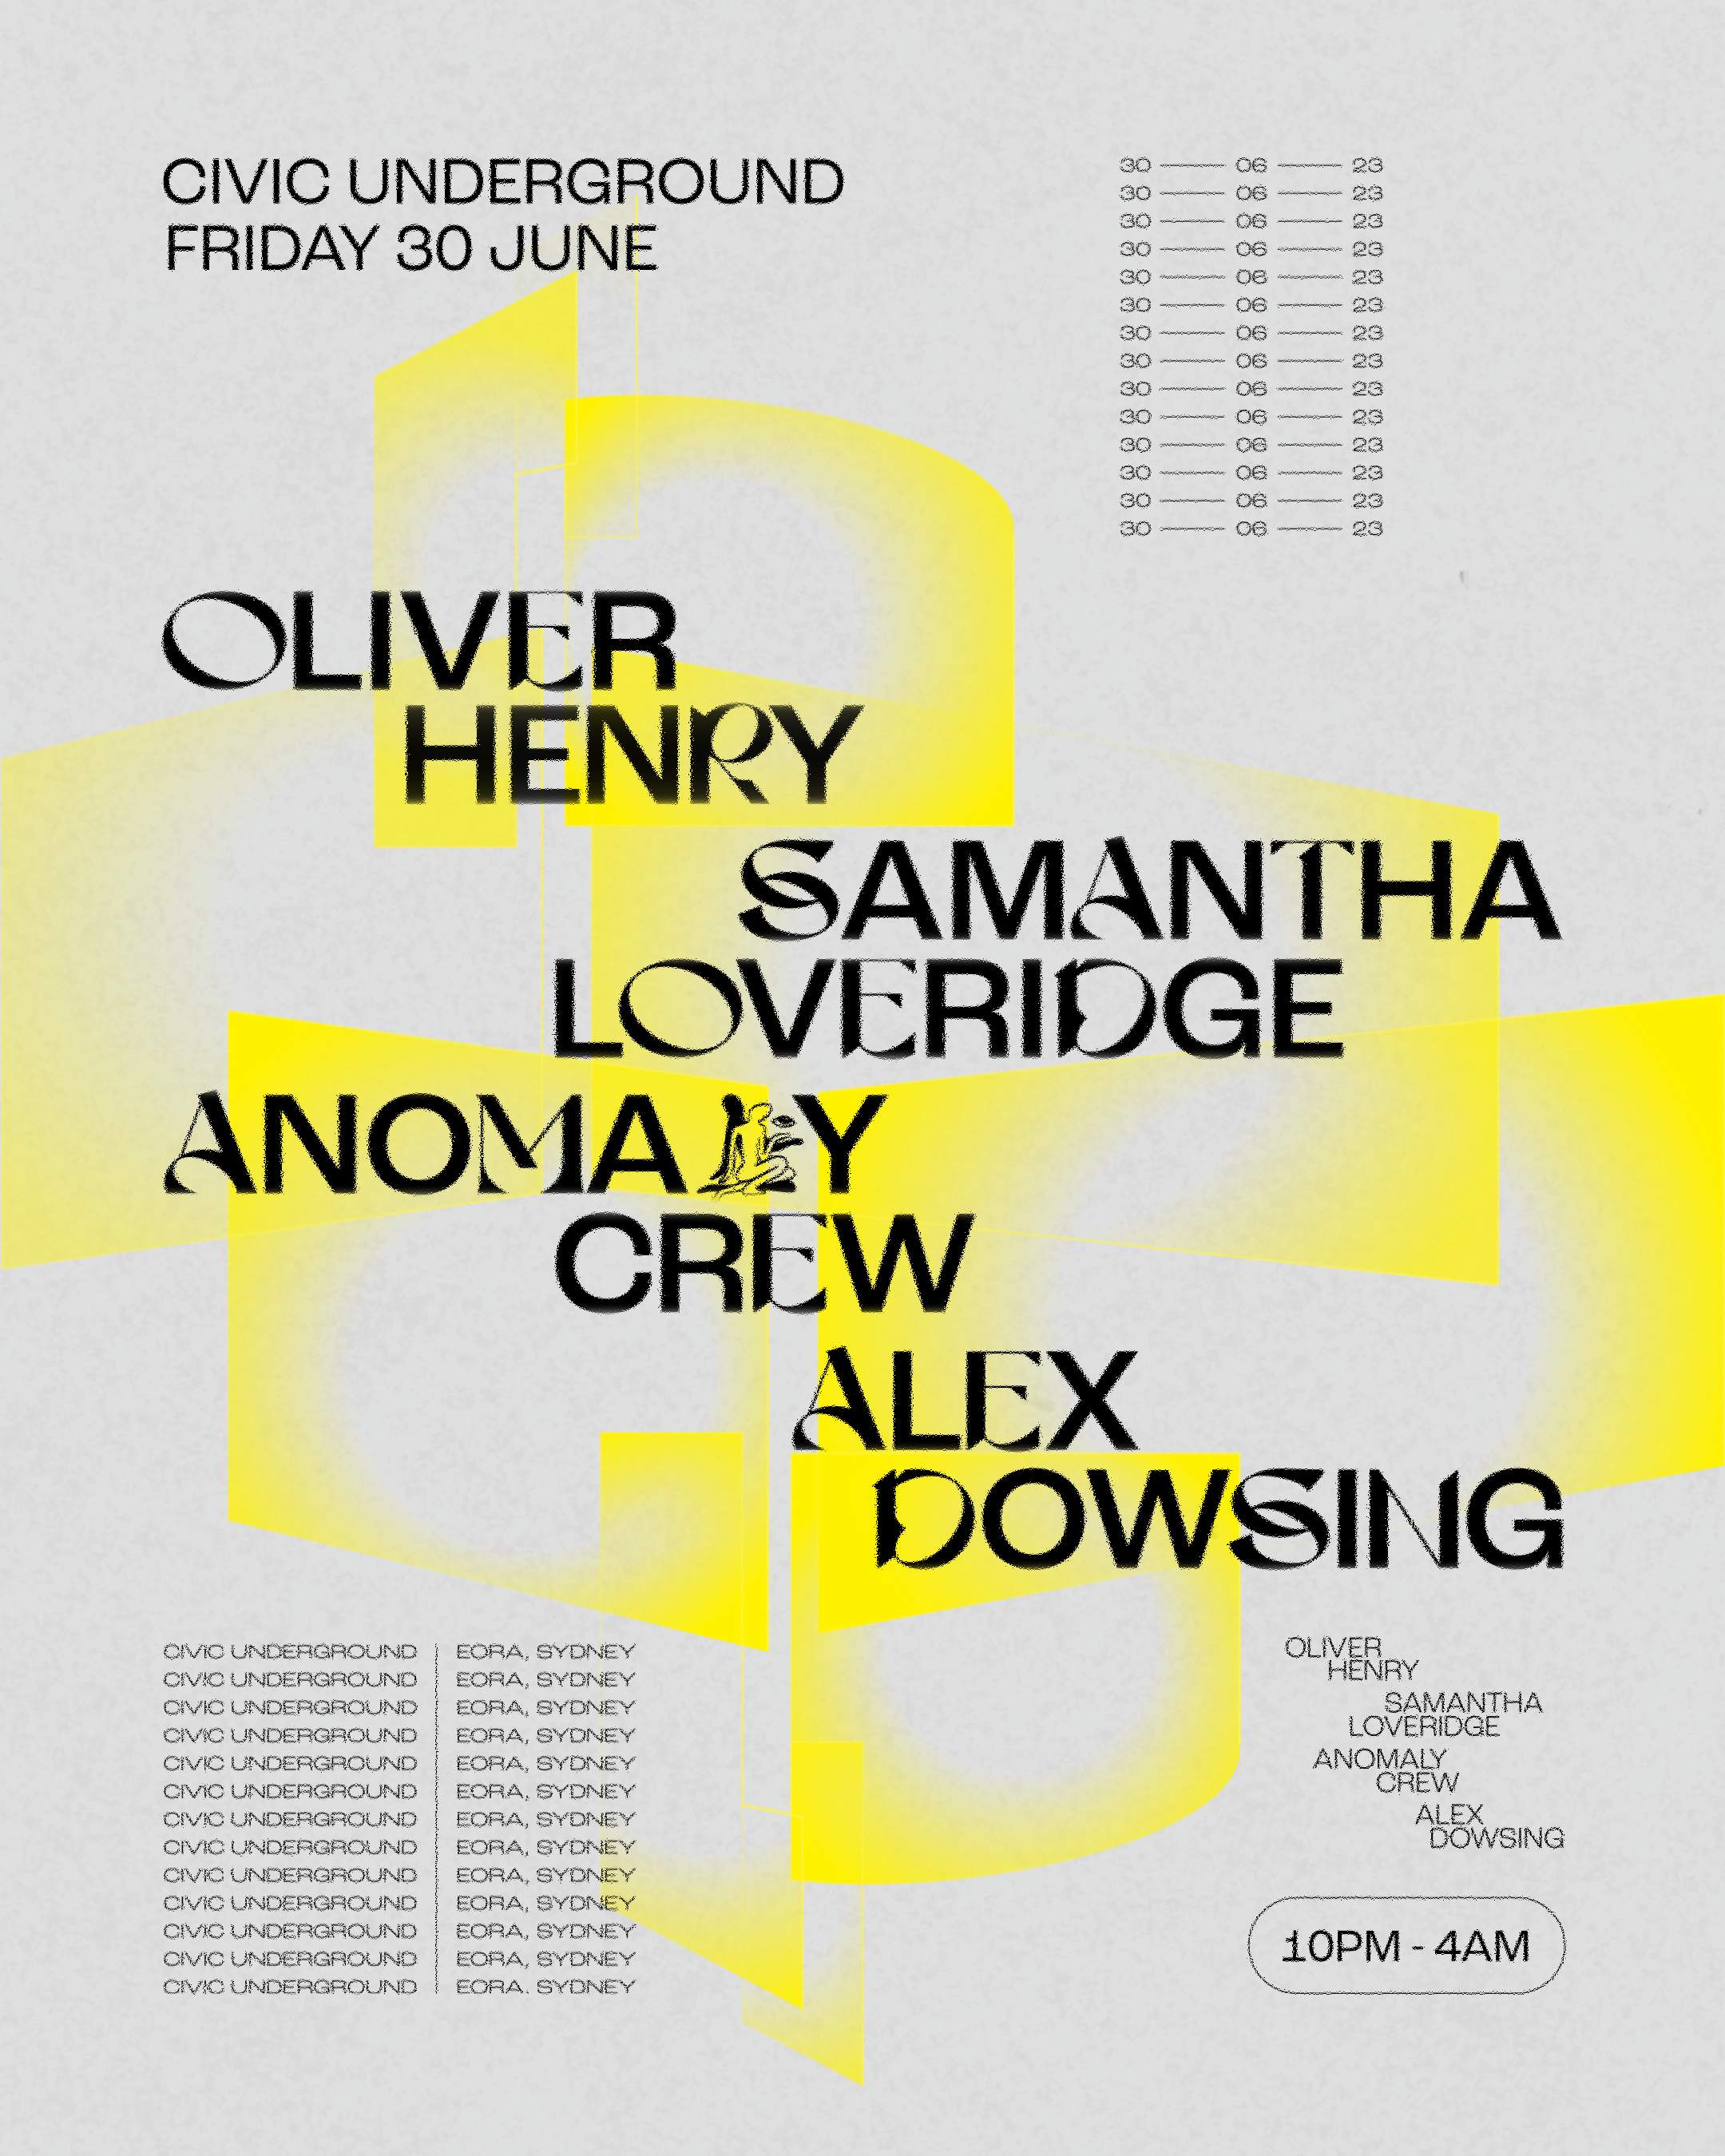 Oliver Henry at Civic with Samantha Loveridge, Anomaly Crew & Alex Dowsing - Página frontal